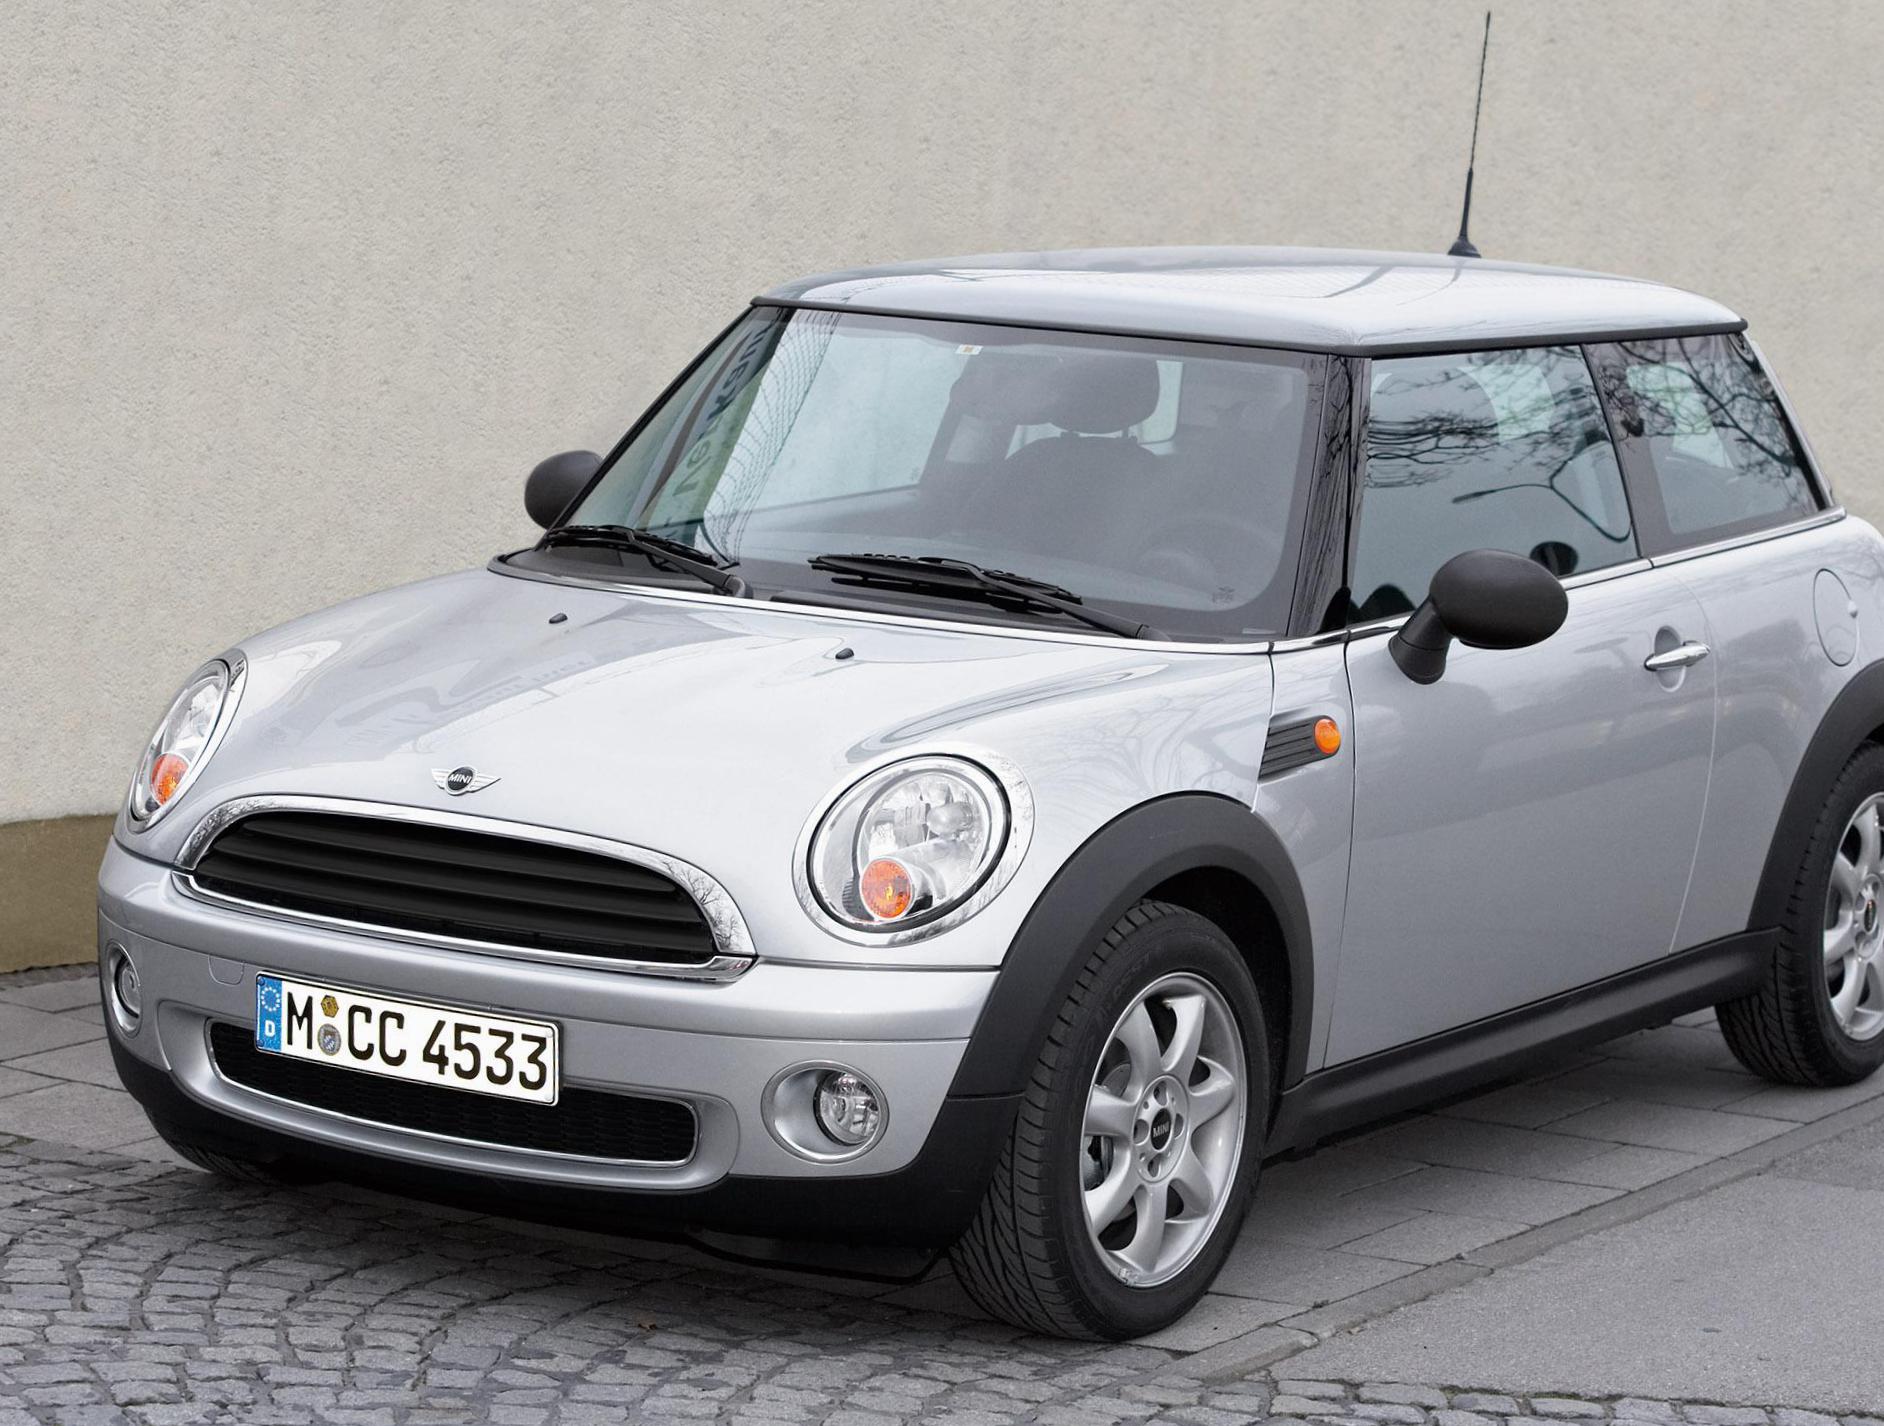 One MINI Specification 2006